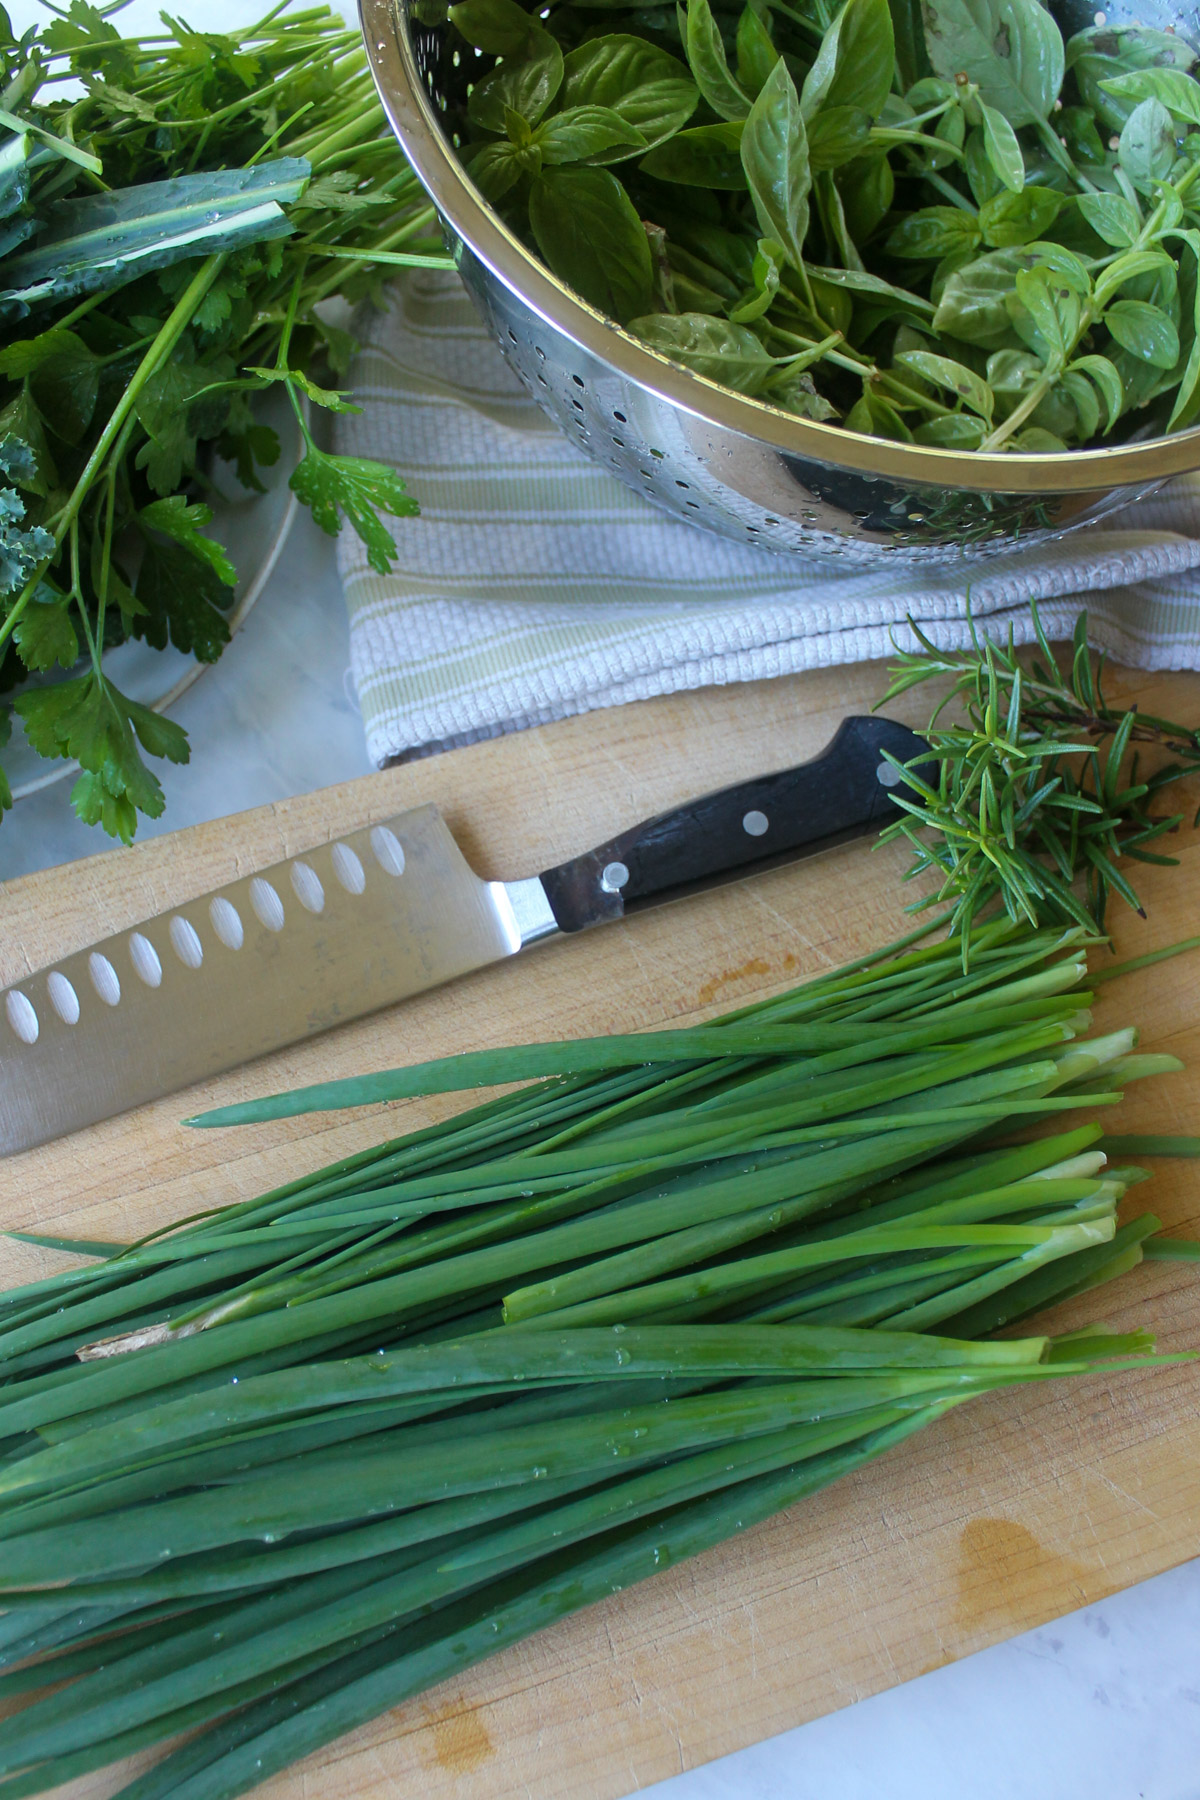 Scallions and chives on a cutting board ready to chop and freeze.